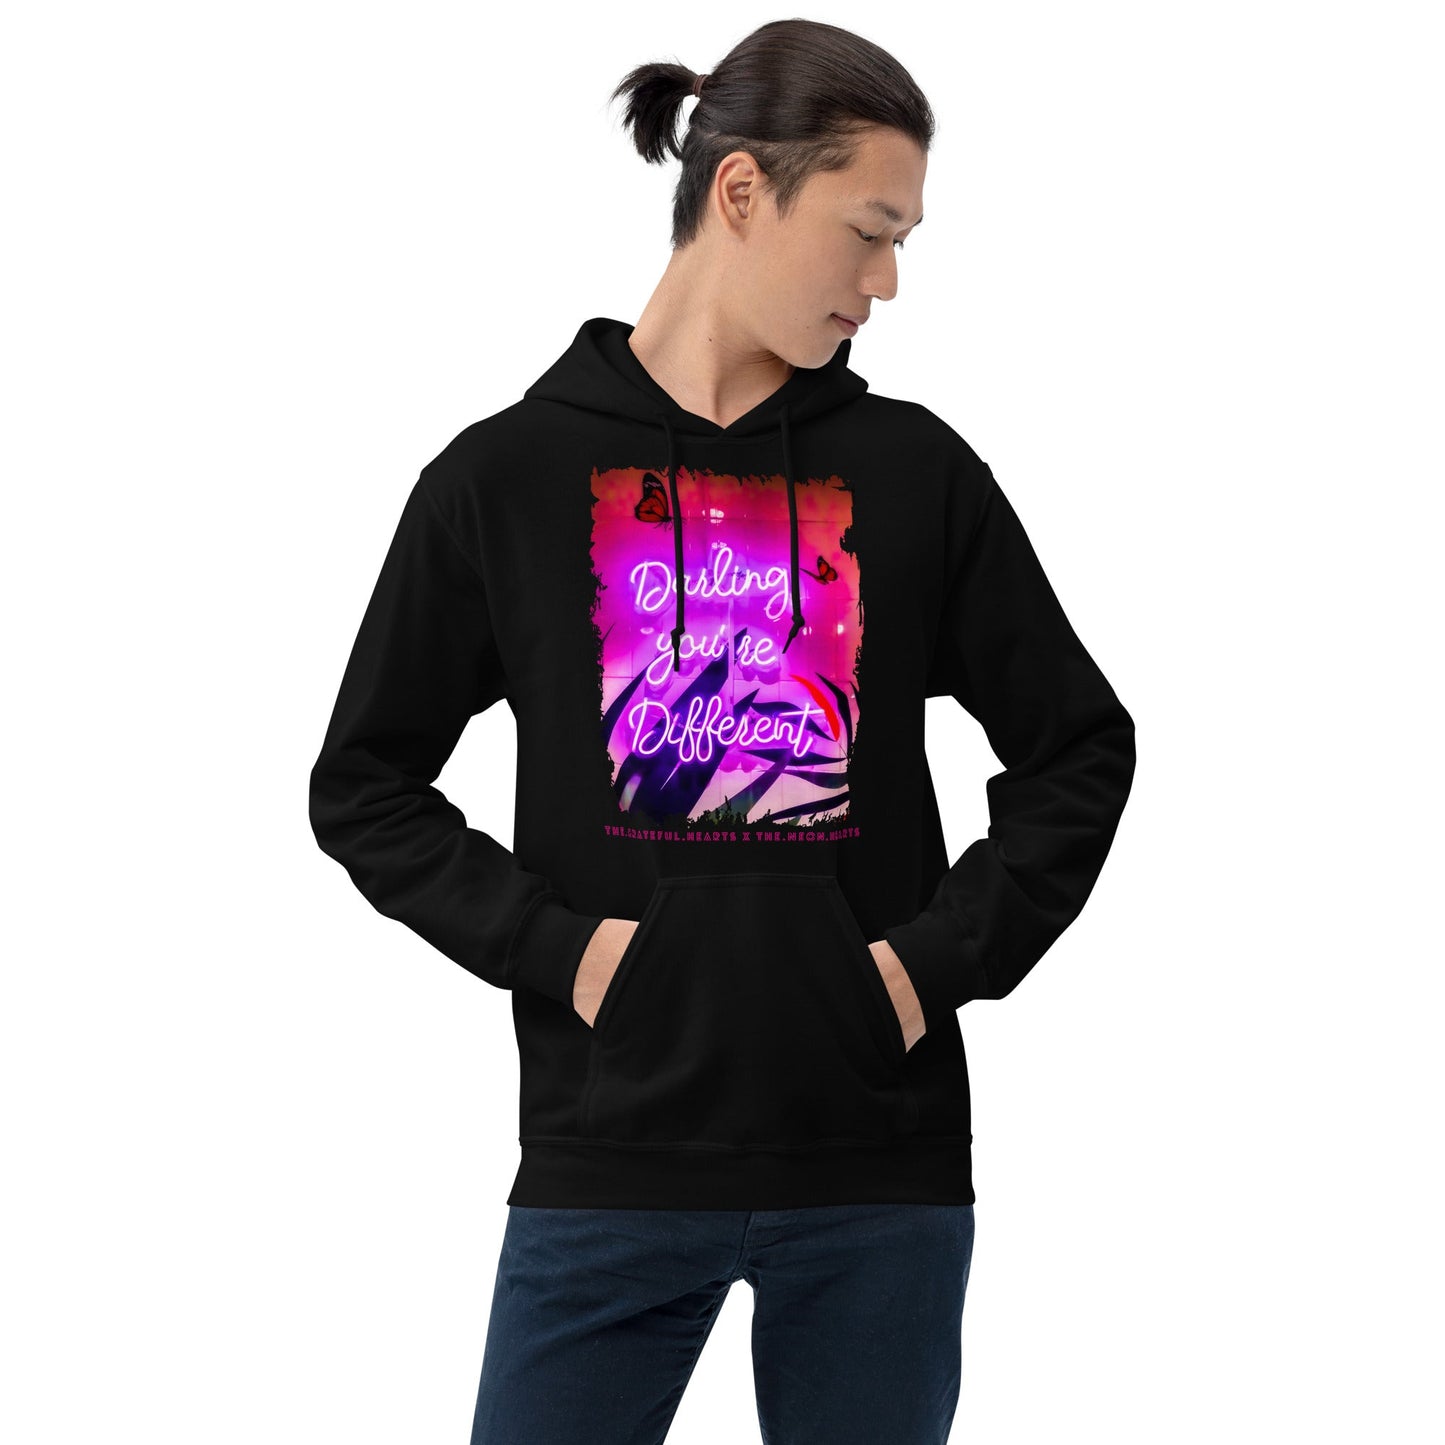 Darling You're Different ❤️ - Unisex Heavy Blend Hoodie (Available in Various Colors 💖💙💜) - The Grateful Hearts